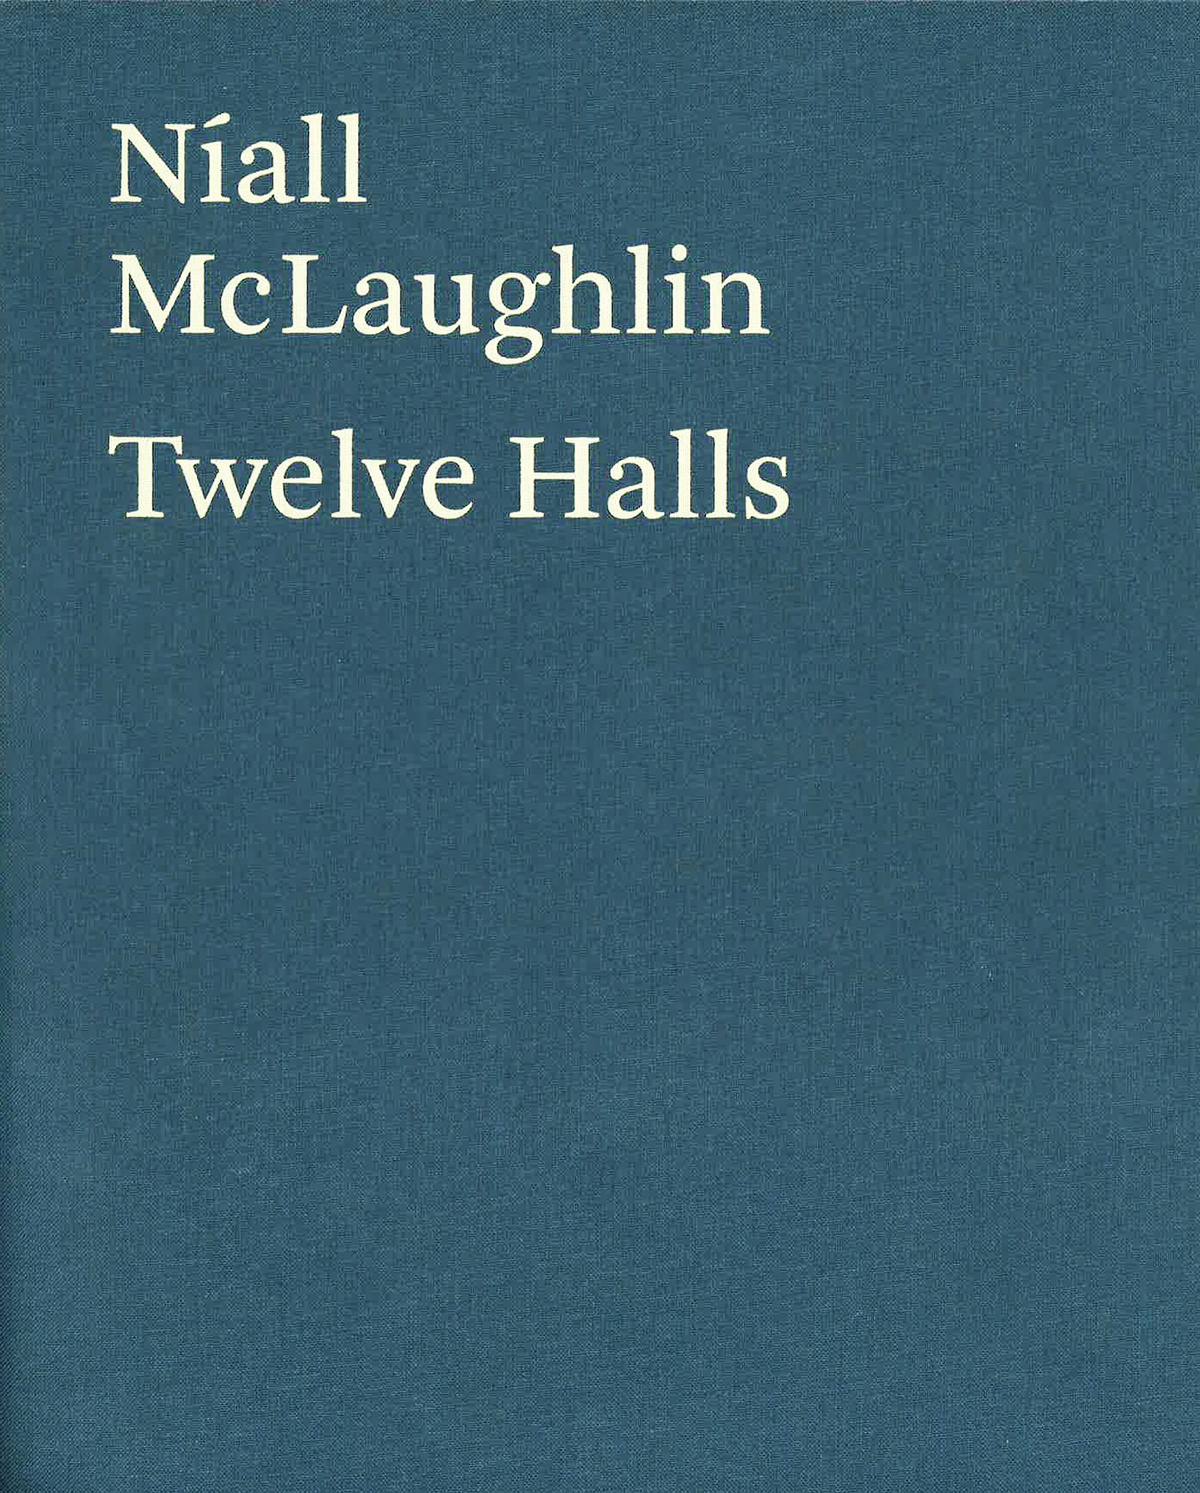 Twelve Halls – A Book by Niall McLaughlin Architects